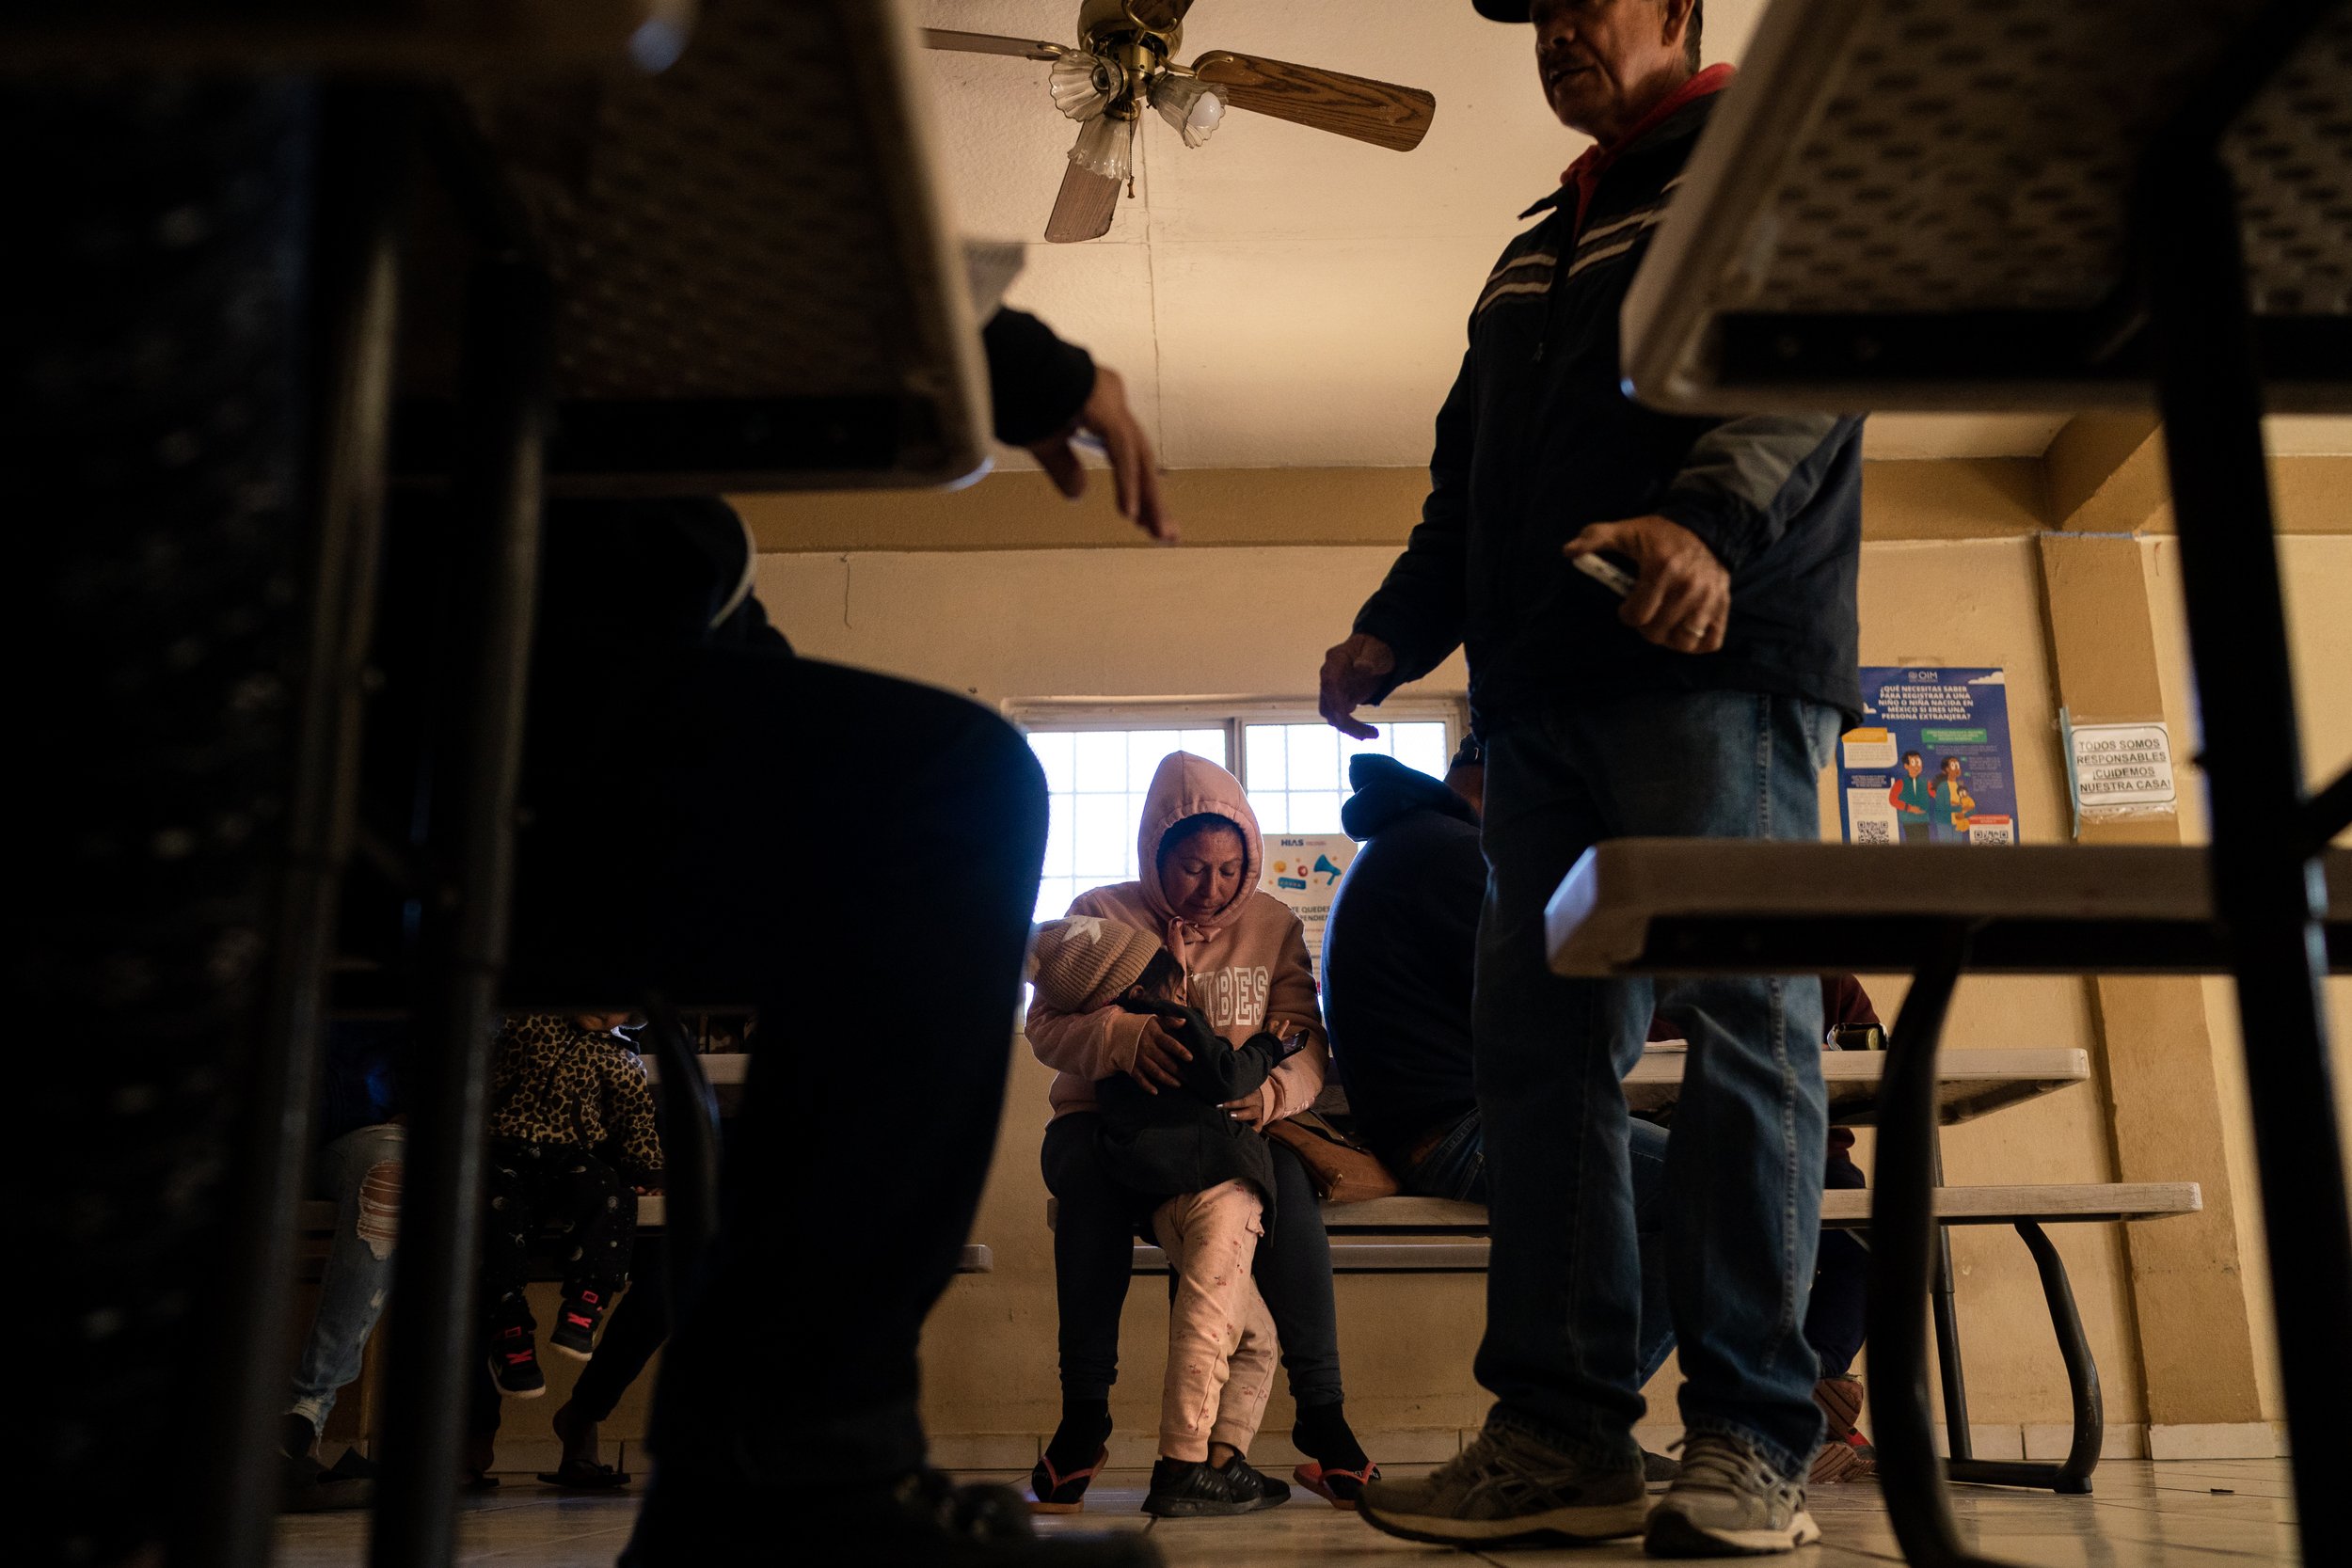  A migrant mother holds her daughter, who’s names has been omitted for safety concerns, as she listens to Jose Manuel Oroszco Perez, at right, teach a class on auto mechanics for a group of adult migrants at La Casa de Misericordia on Friday, Jan. 7,